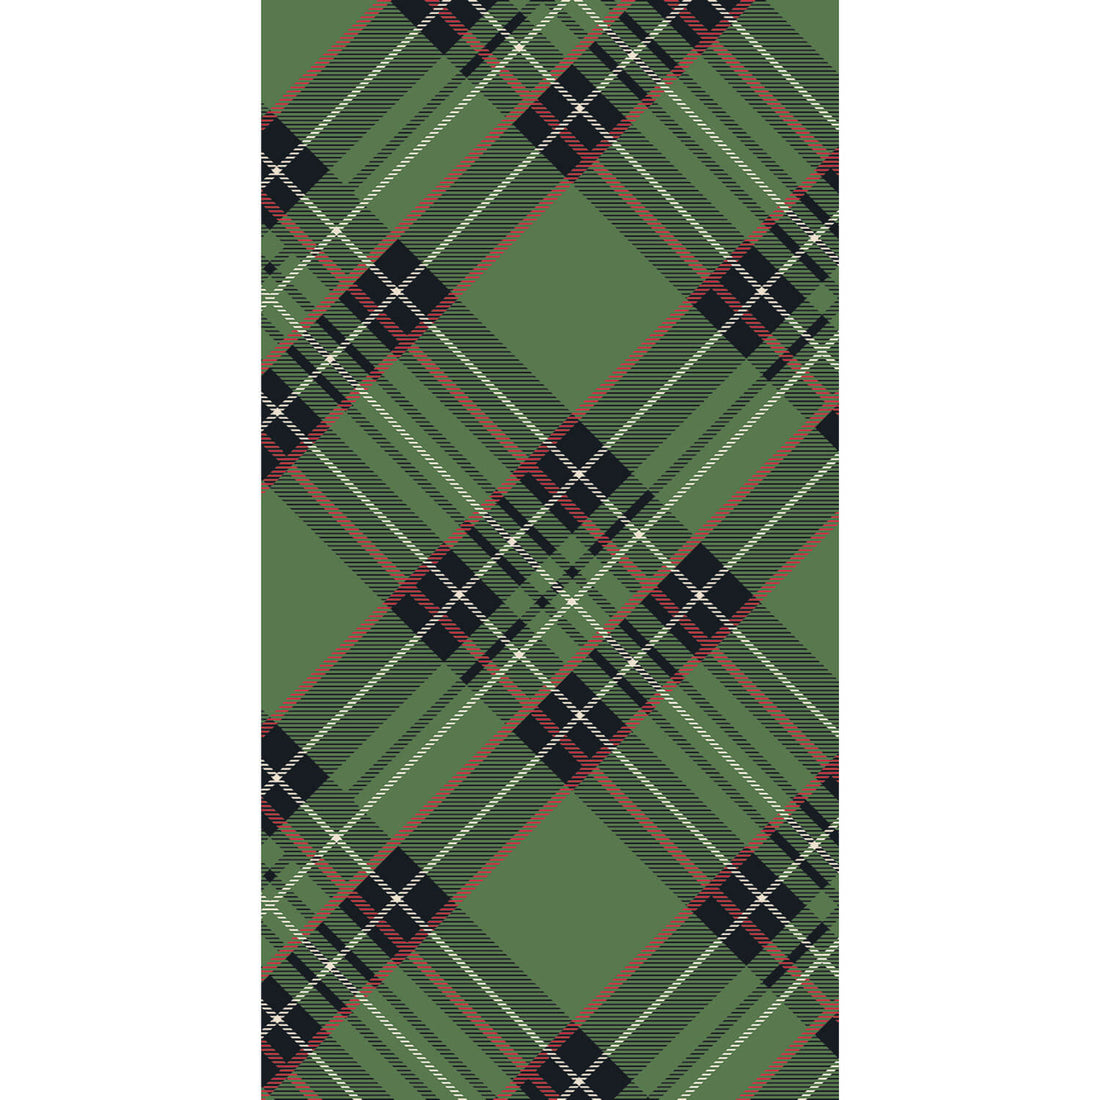 A square cocktail napkin featuring a diagonal plaid pattern of black, red and white over medium green.